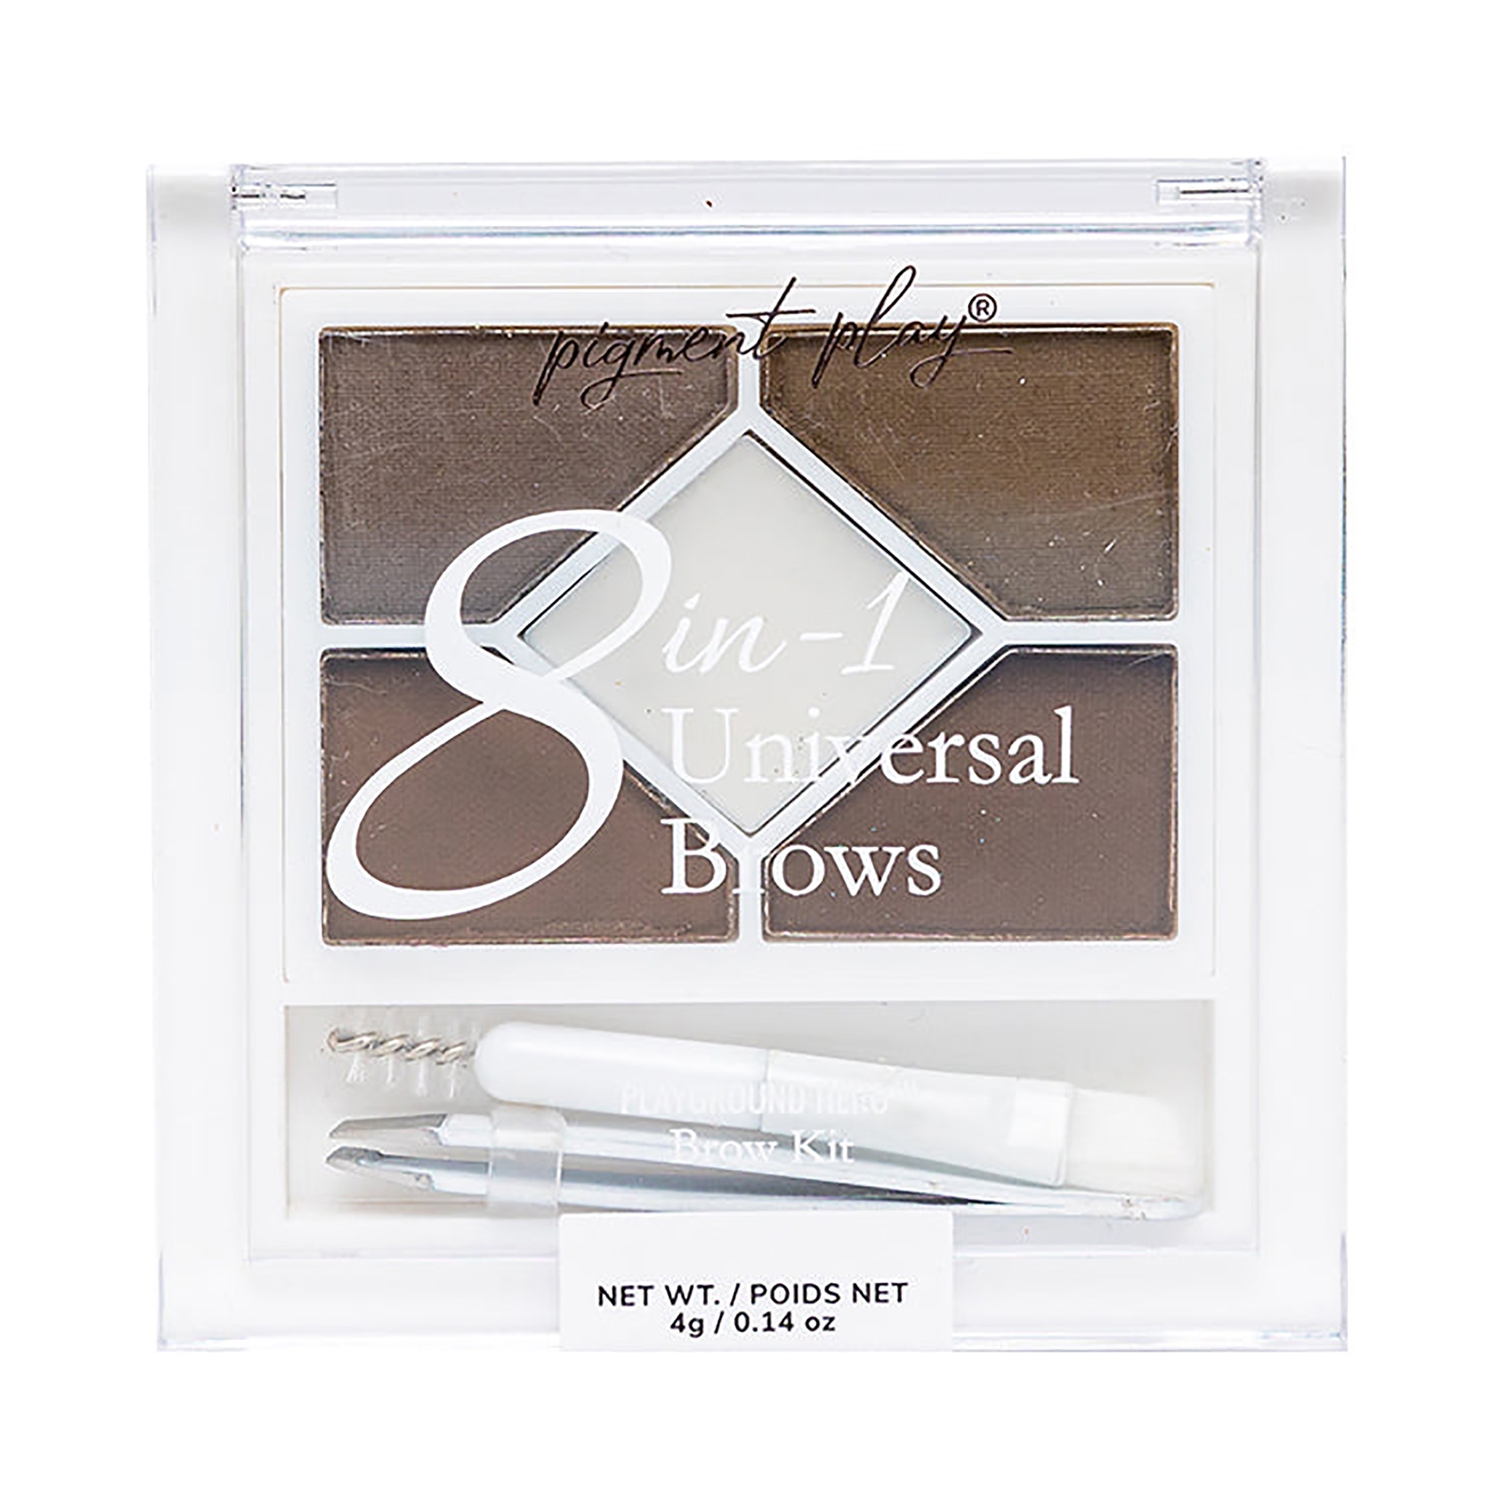 Pigment Play | Pigment Play 8-In-1 Brow Kit - Universal Brows (4g)